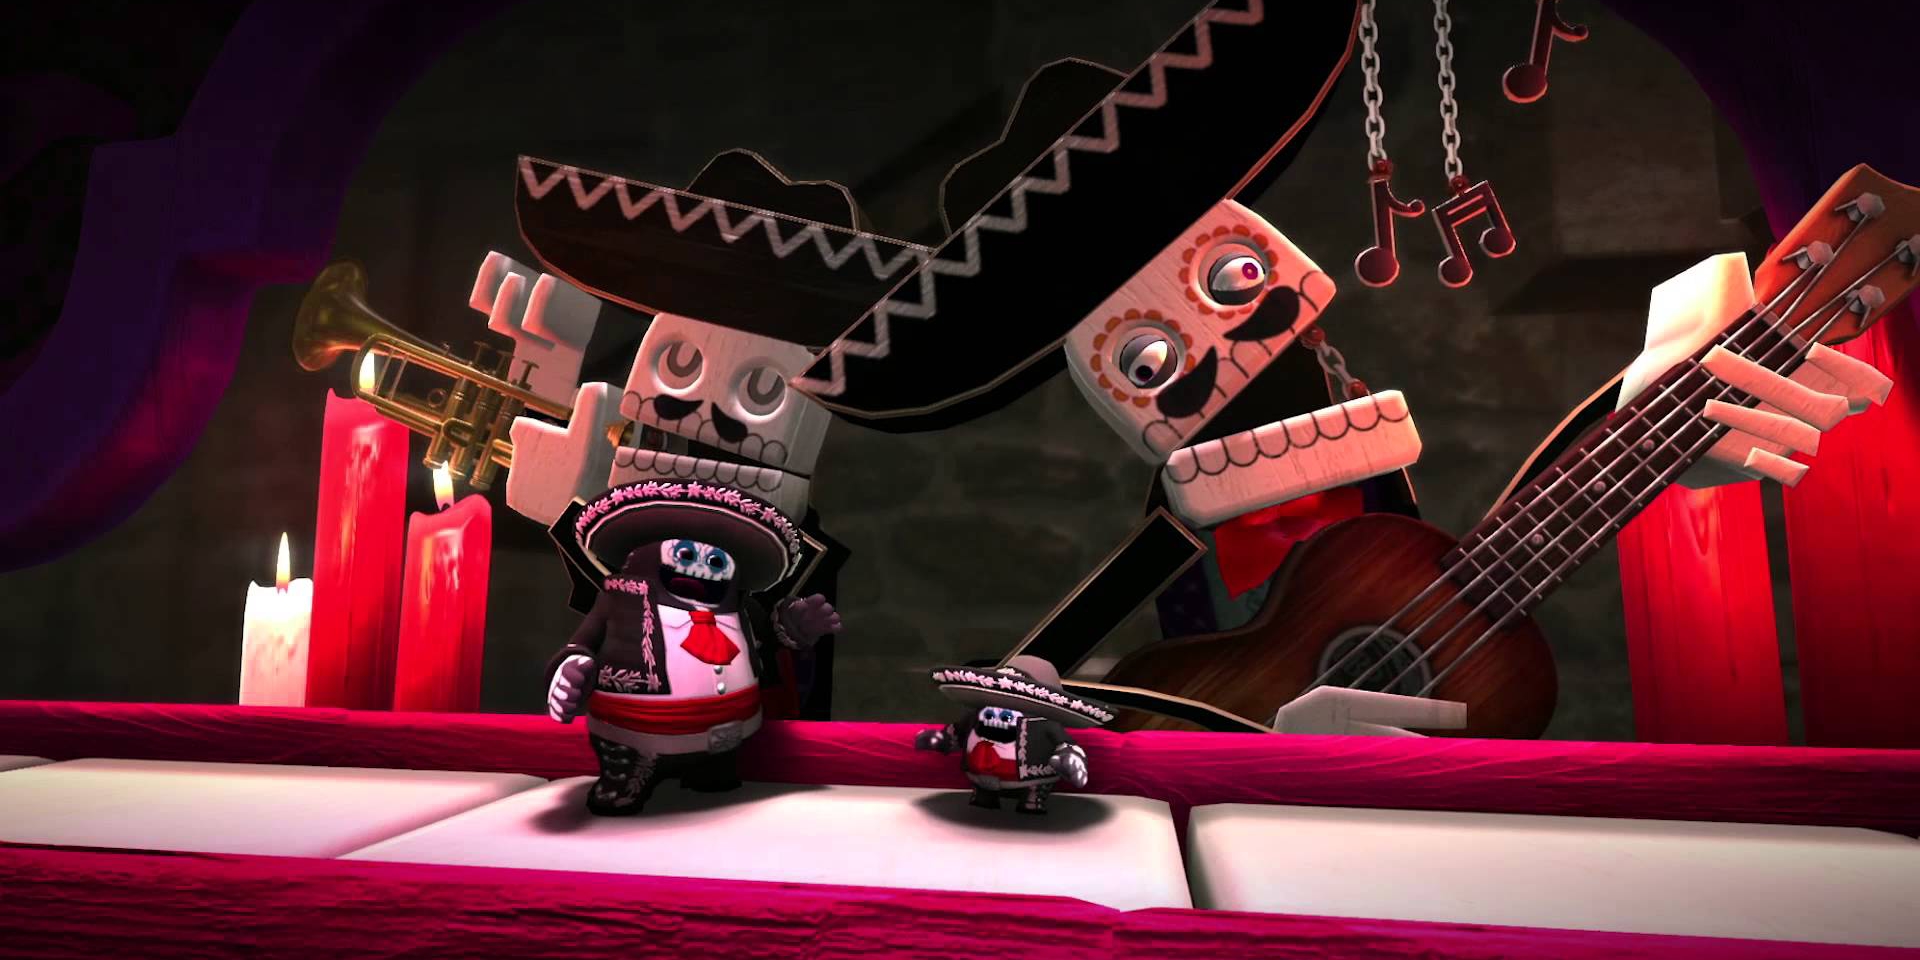 LittleBigPlanet 3: Journey Home and ‘The Weeding’ – DLC